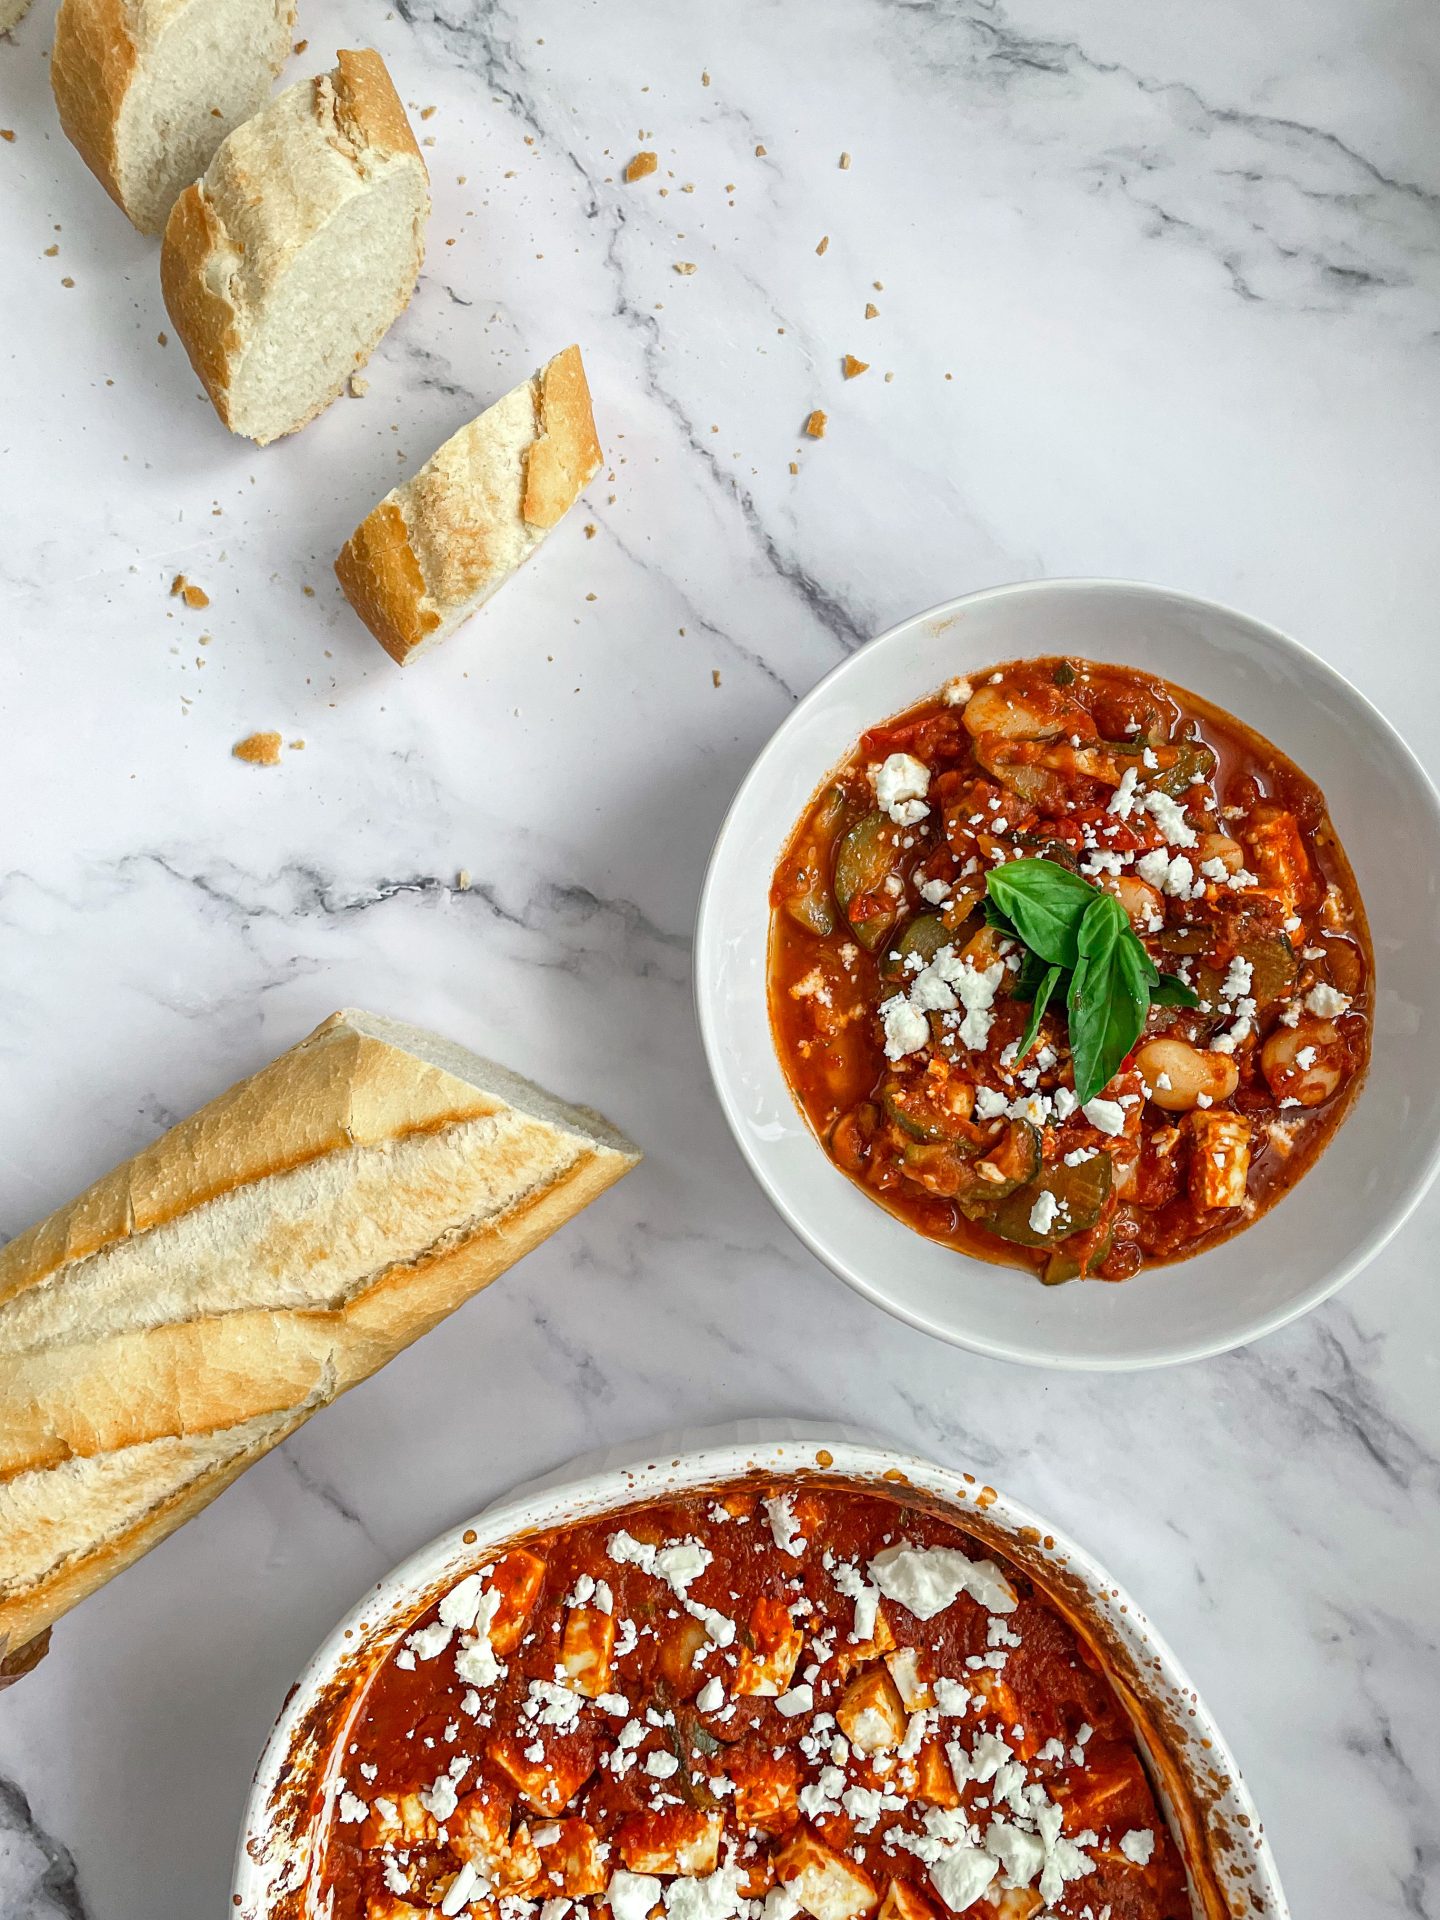 Cannellini Beans in Tomato Sauce with Baked Courgette & Feta Cheese – Nics Nutrition